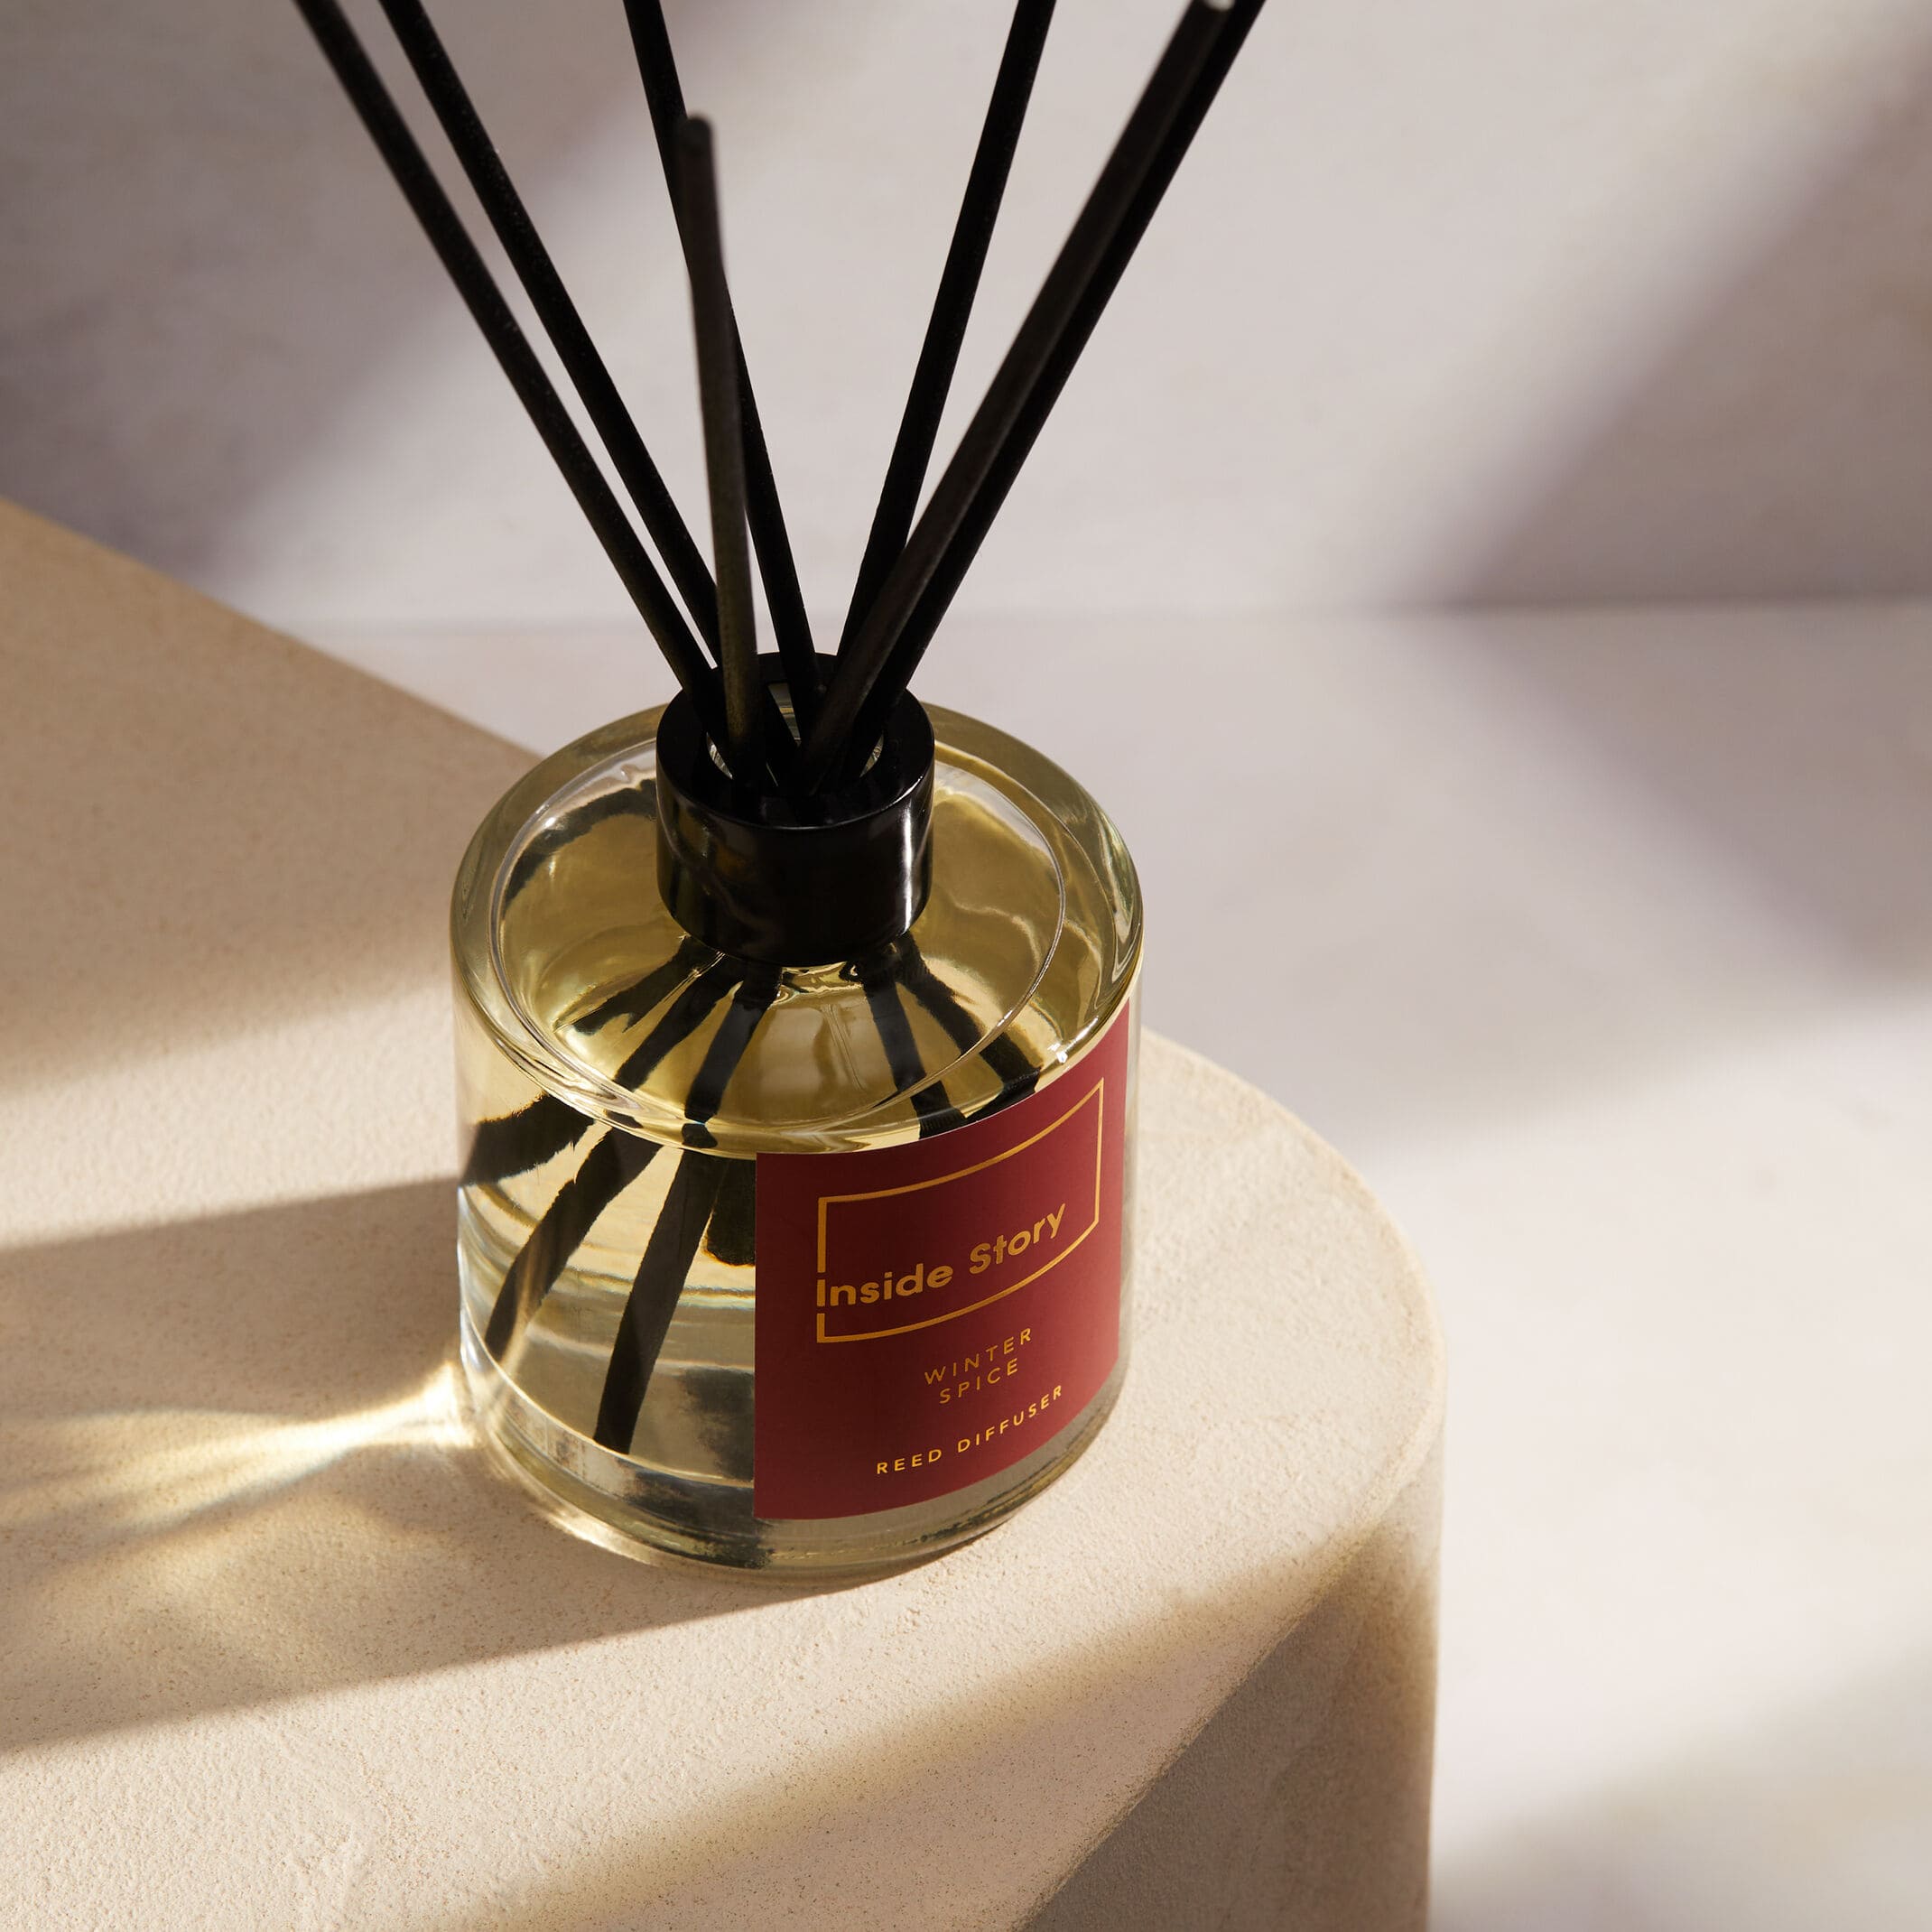 Autumnal reed diffuser scents